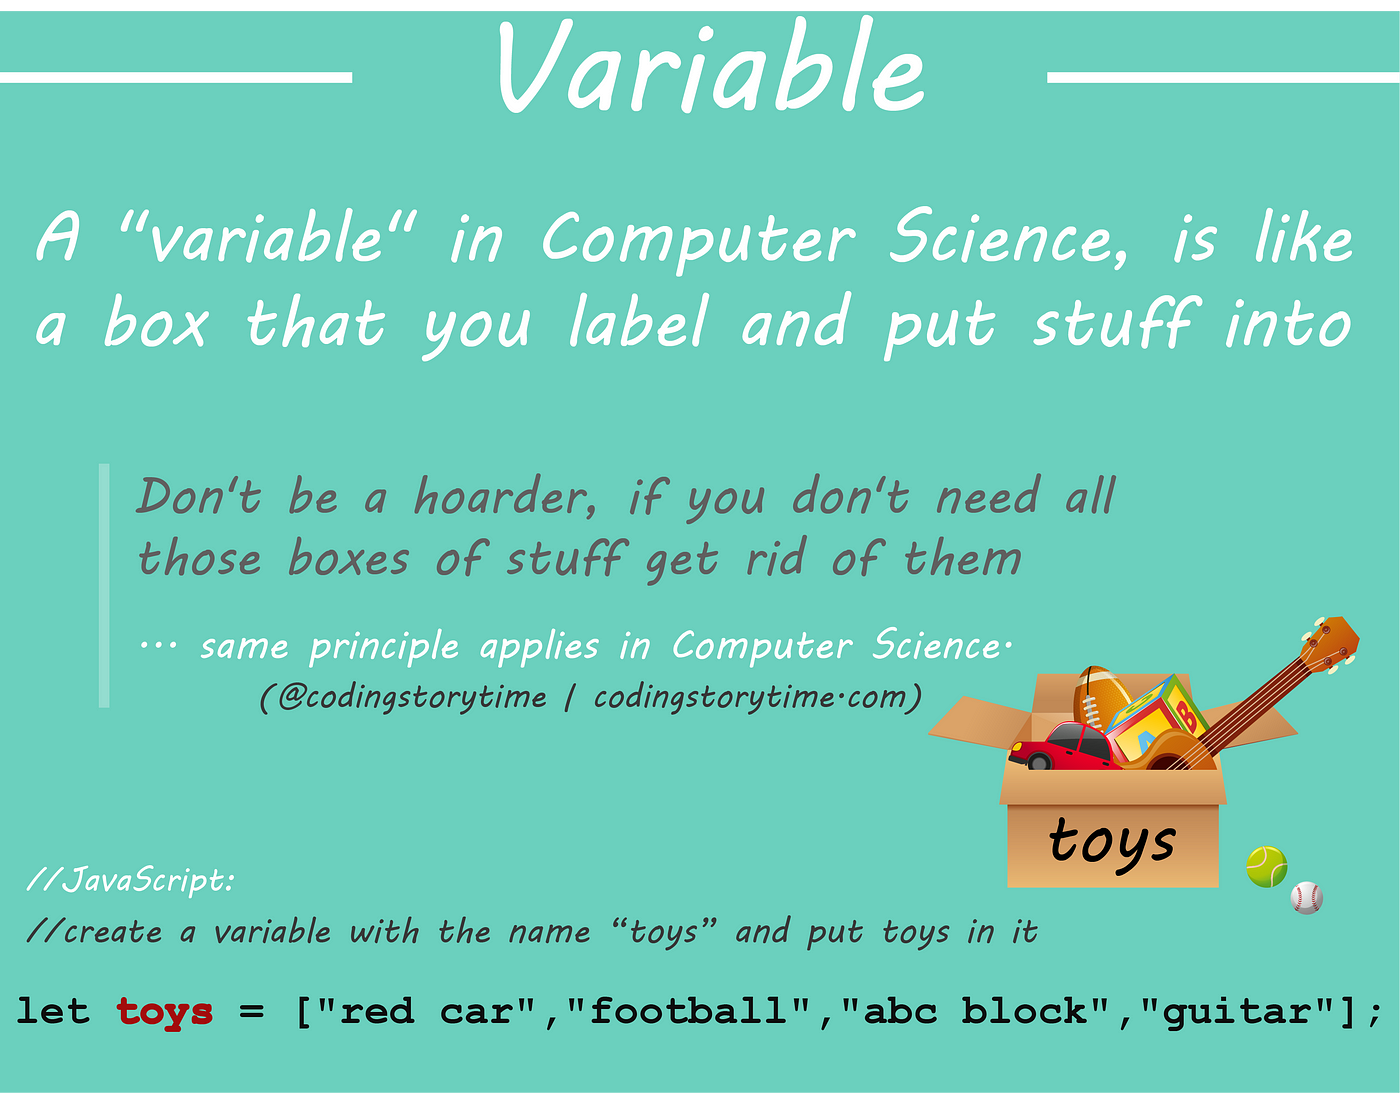 whats another word for variable